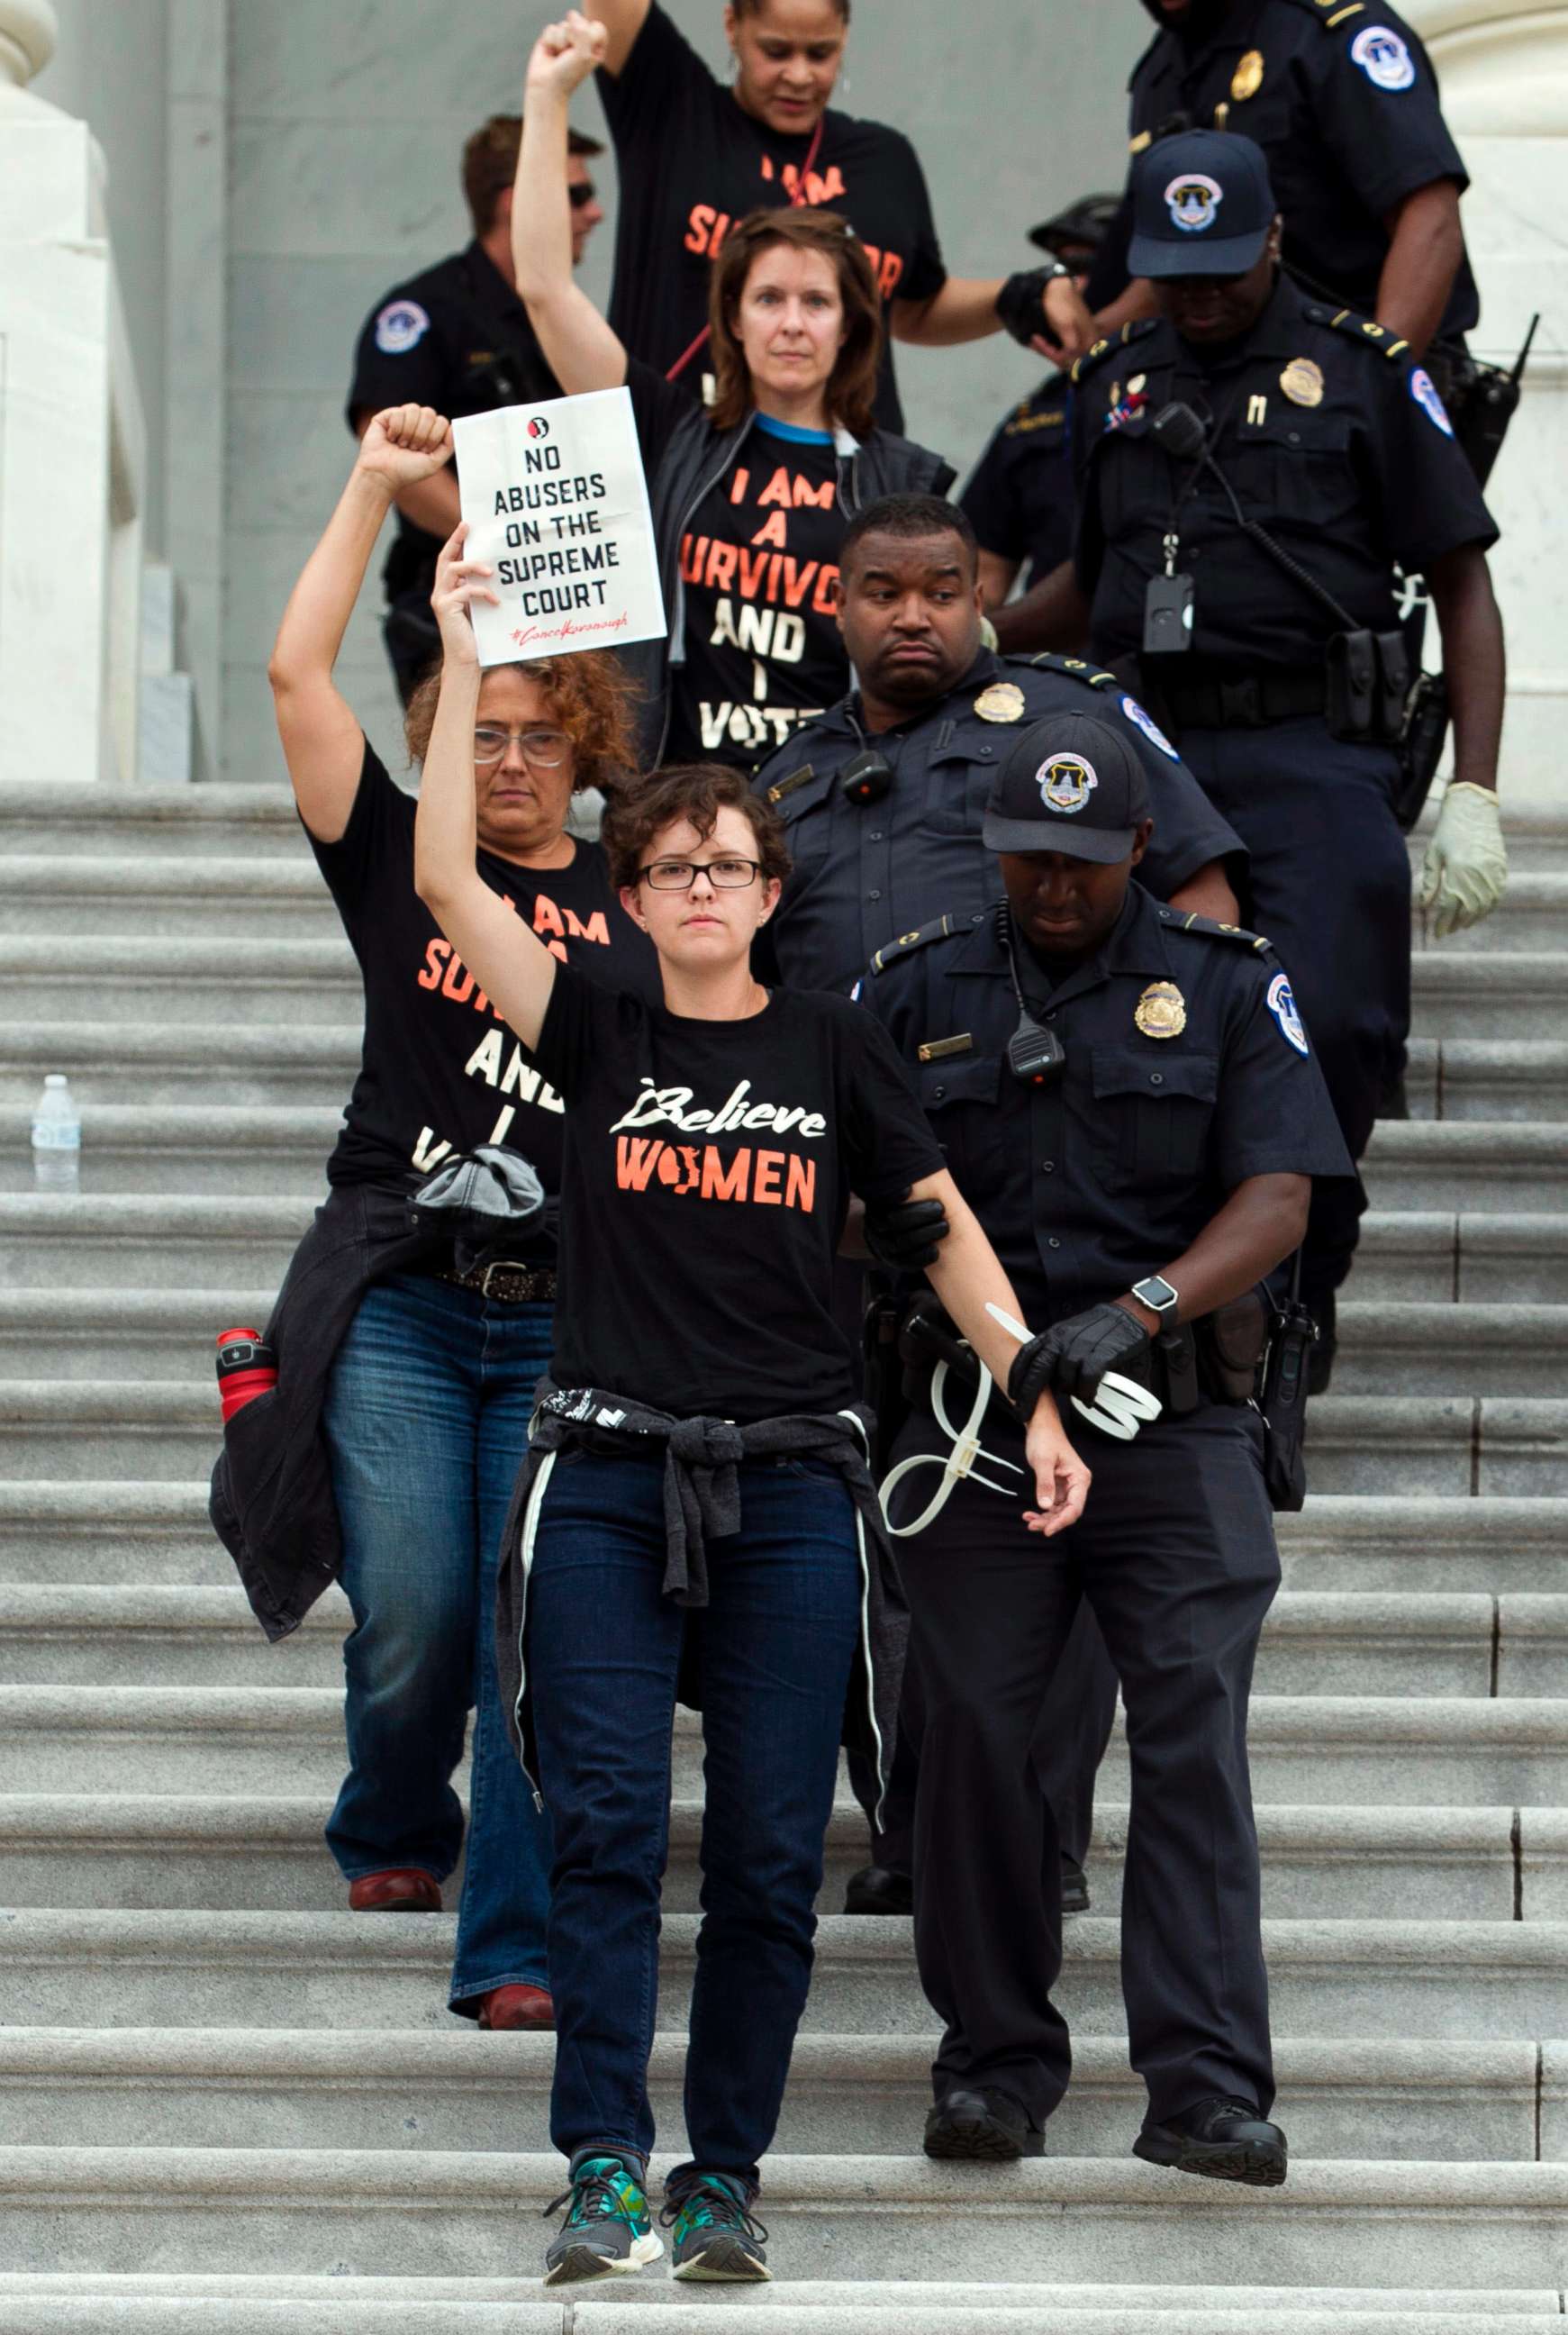 PHOTO: Demonstrators are arrested on the steps of the Capitol as they protest the appointment of Supreme Court nominee Brett Kavanaugh, Oct. 6, 2018.